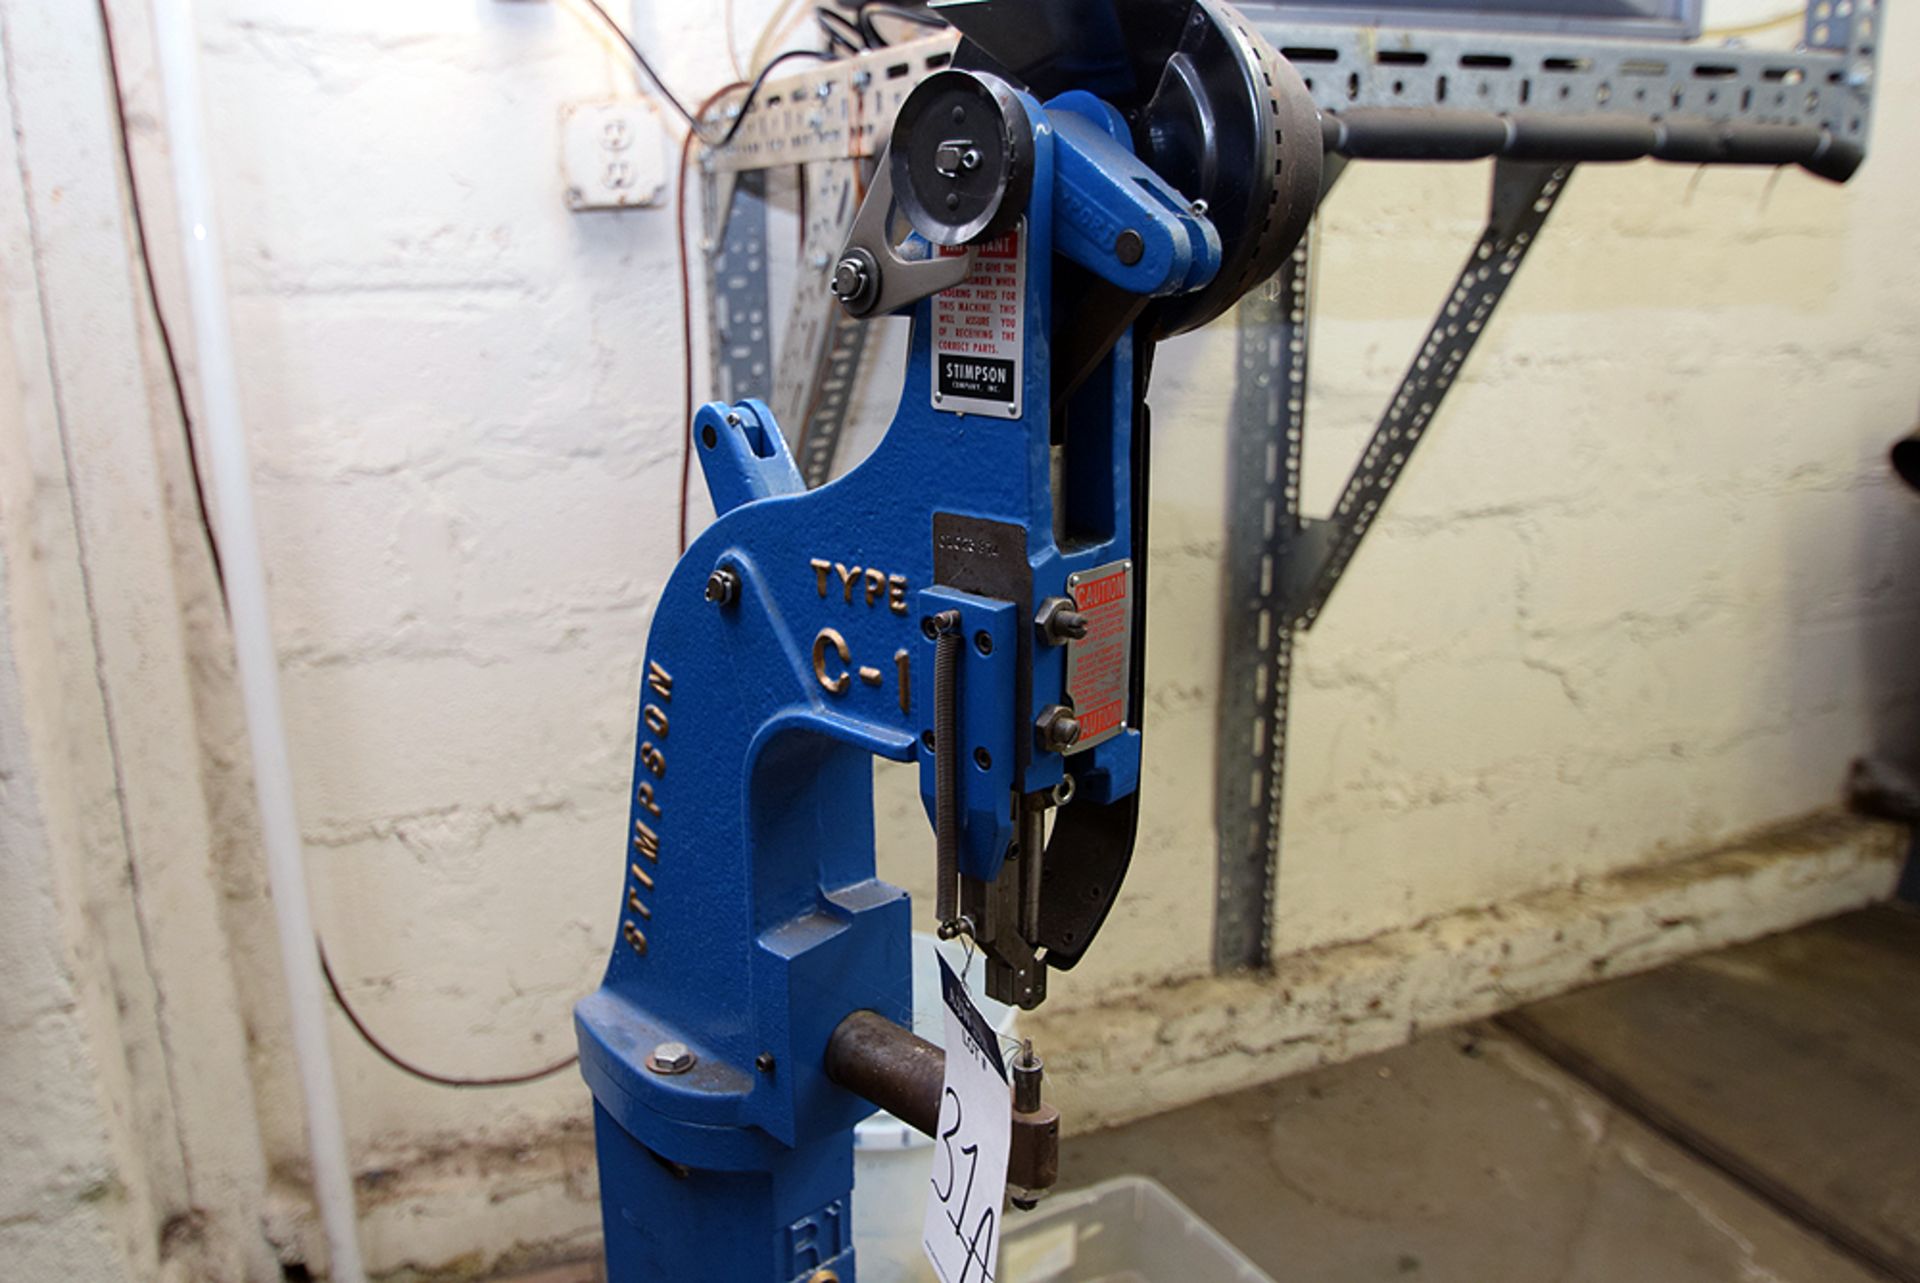 Stimpson Model C-1 Foot Operated Riveter